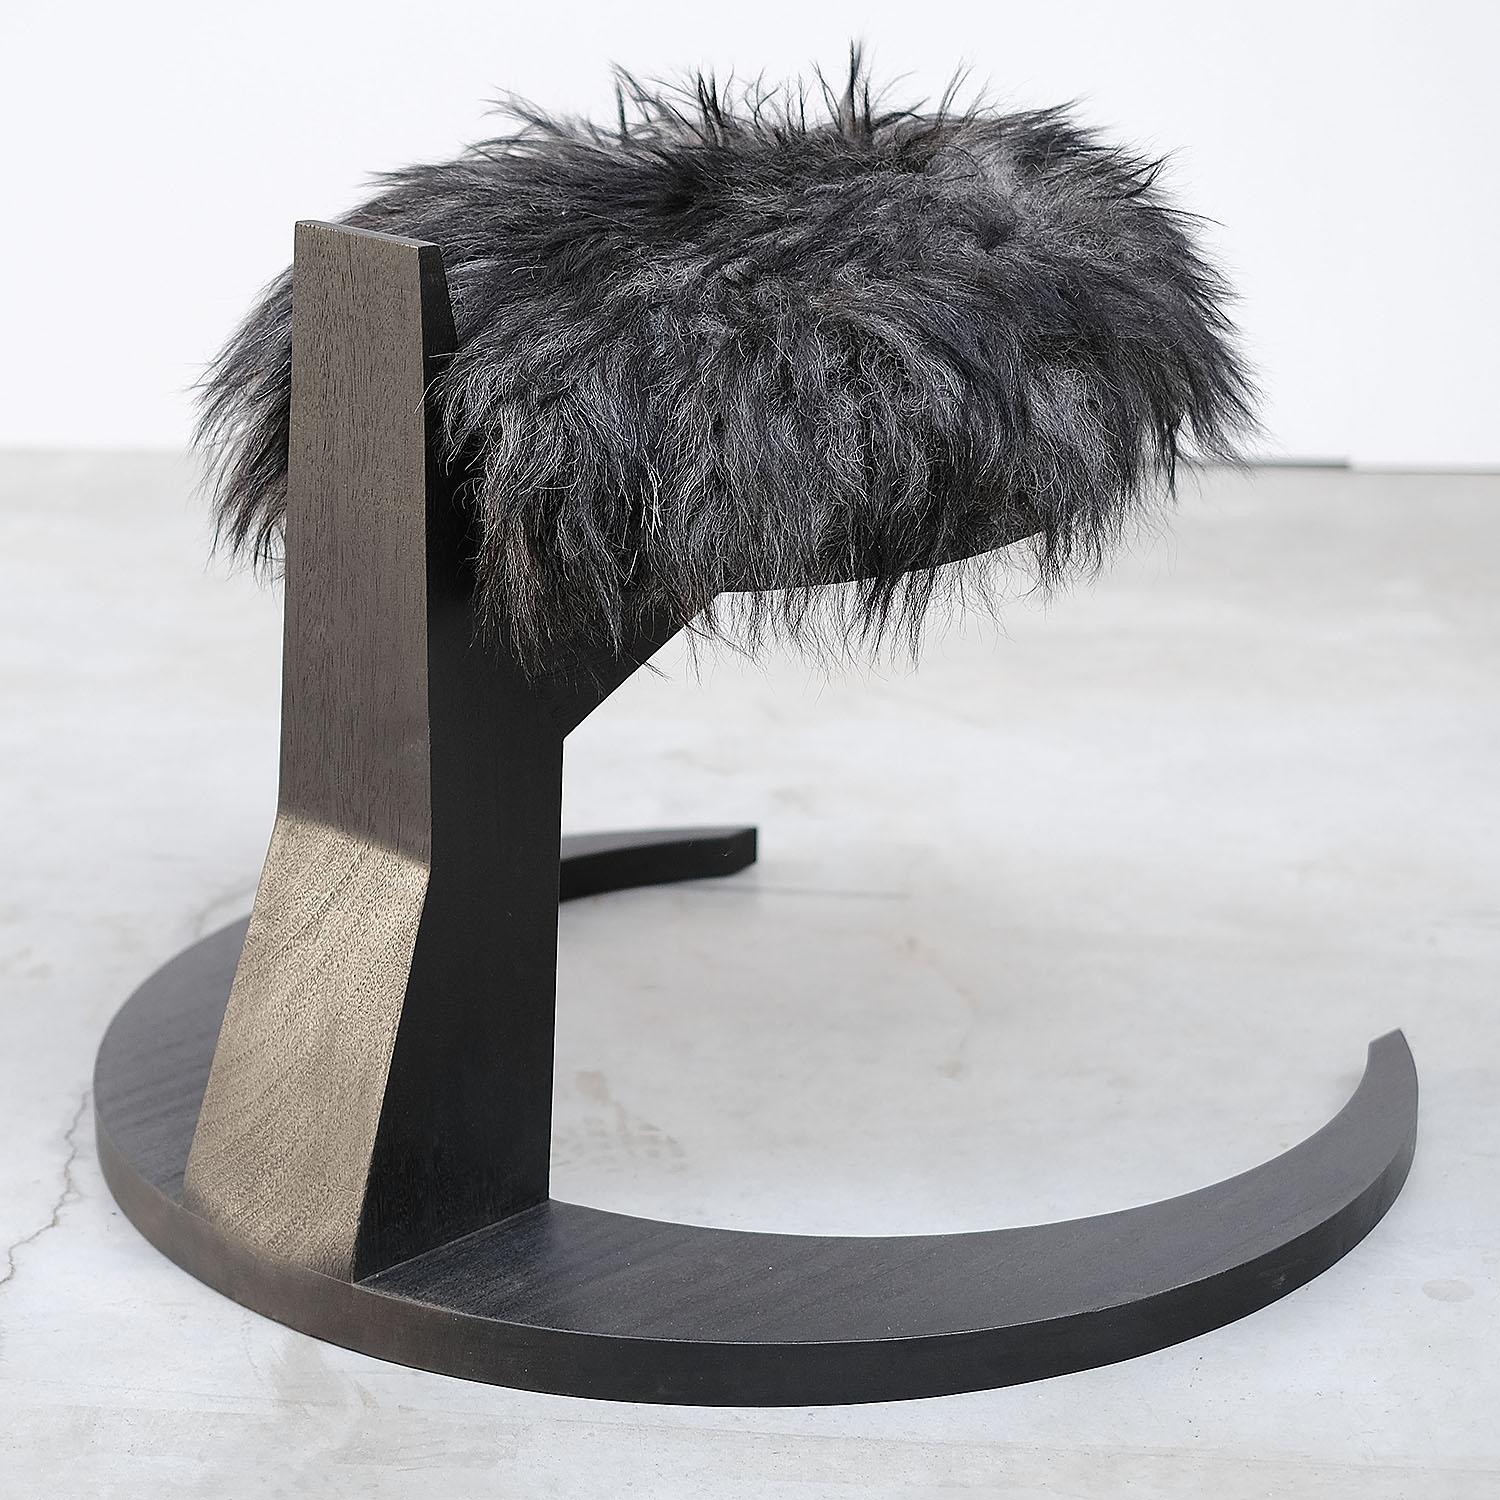 Contemporary stool In iroko wood and sheep wool- Hevioso by Arno Declercq

Material: Burned and waxed Iroko wood finished with a sheep wool fixed seat.
Other finishes and colors possible.

Dimensions: 80 cm wide x 71 cm long x 60 cm